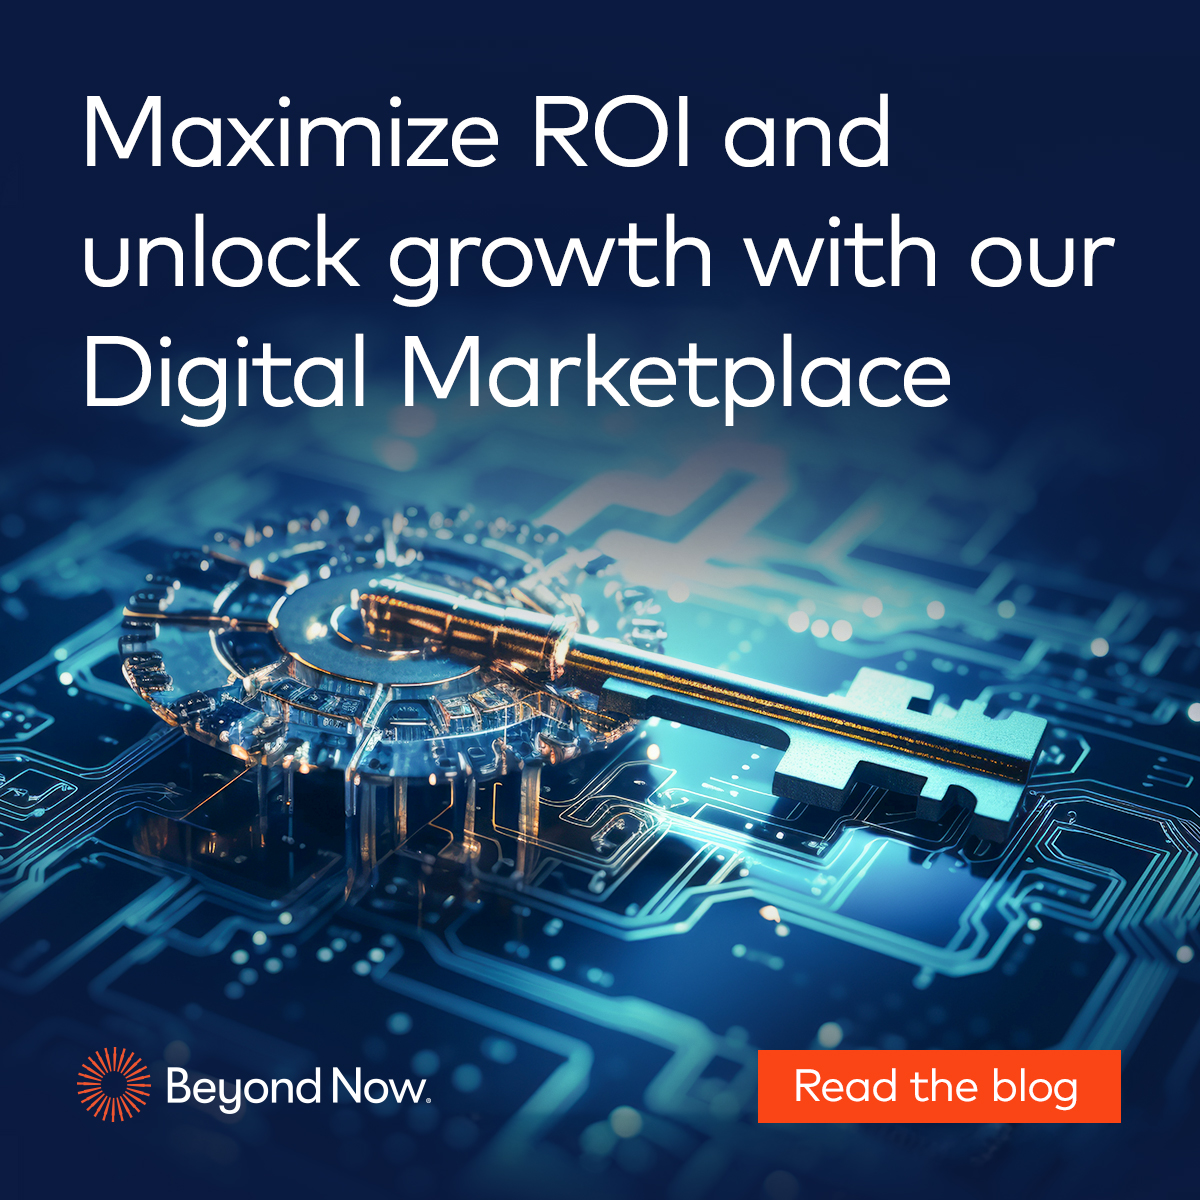 Maximize ROI and unlock growth with our Digital Marketplace. Read more in our latest blog:beyondnow.com/en/insights/bl…

#DigitalMarketplace #AI #Telco